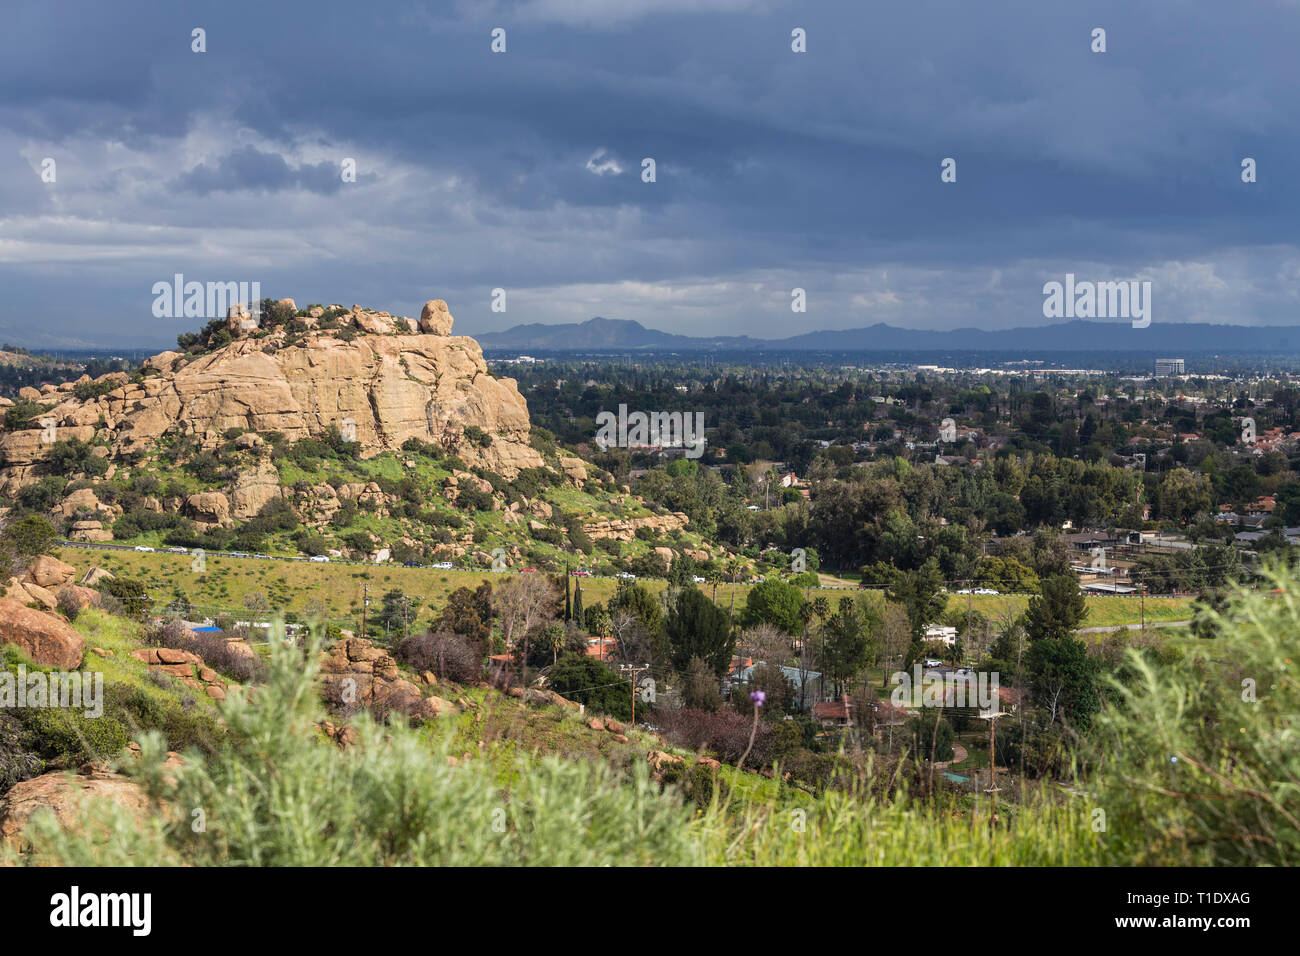 Scenic view of spring storm clouds, Stoney Point Park and the San Fernando Valley near Topanga Canyon Blvd, Porter Ranch and Chatsworth in Los Angeles Stock Photo